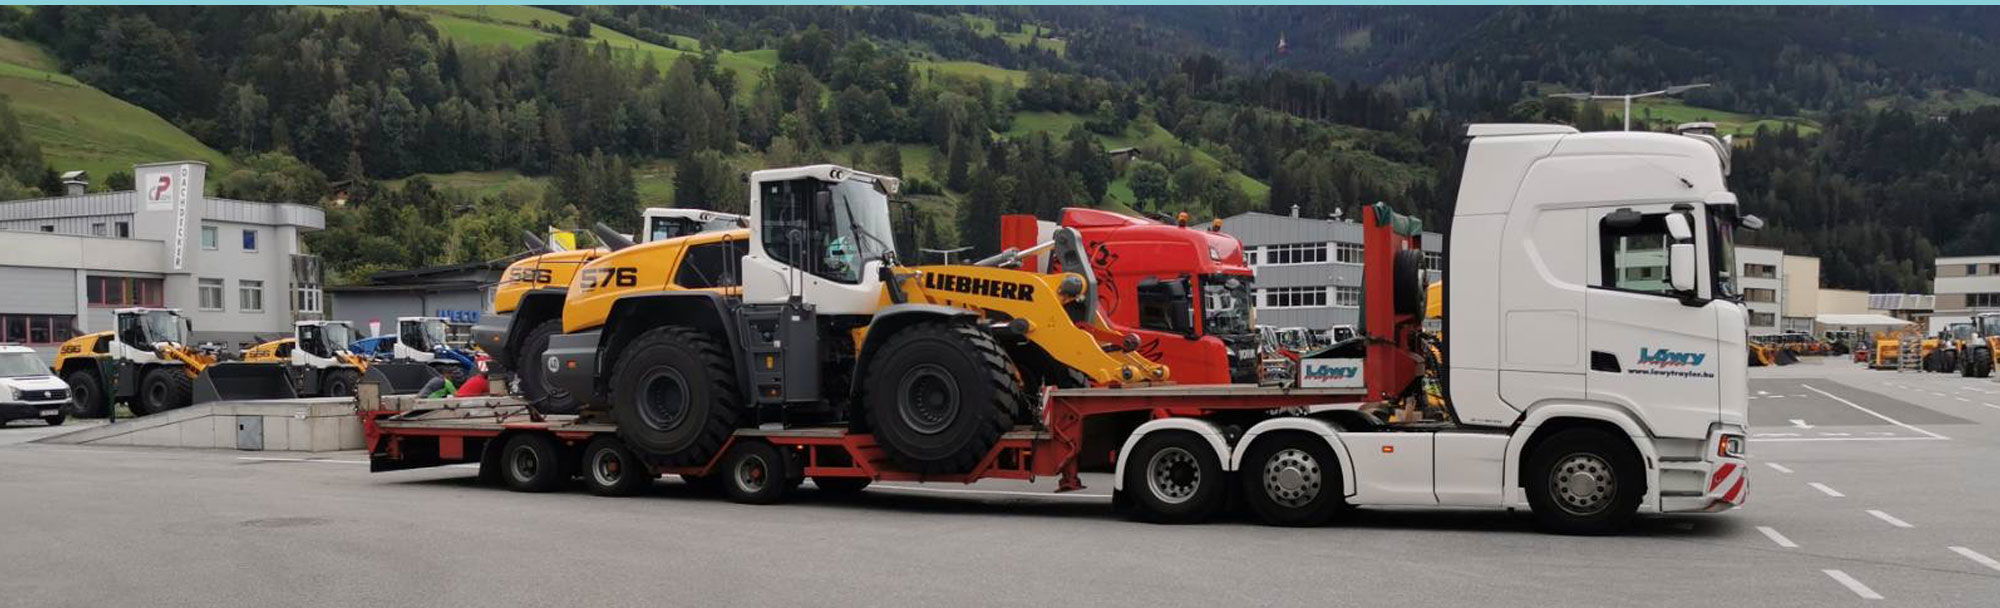 Transport of oversized and overweight vehicles, machines, equipments, heavy transport